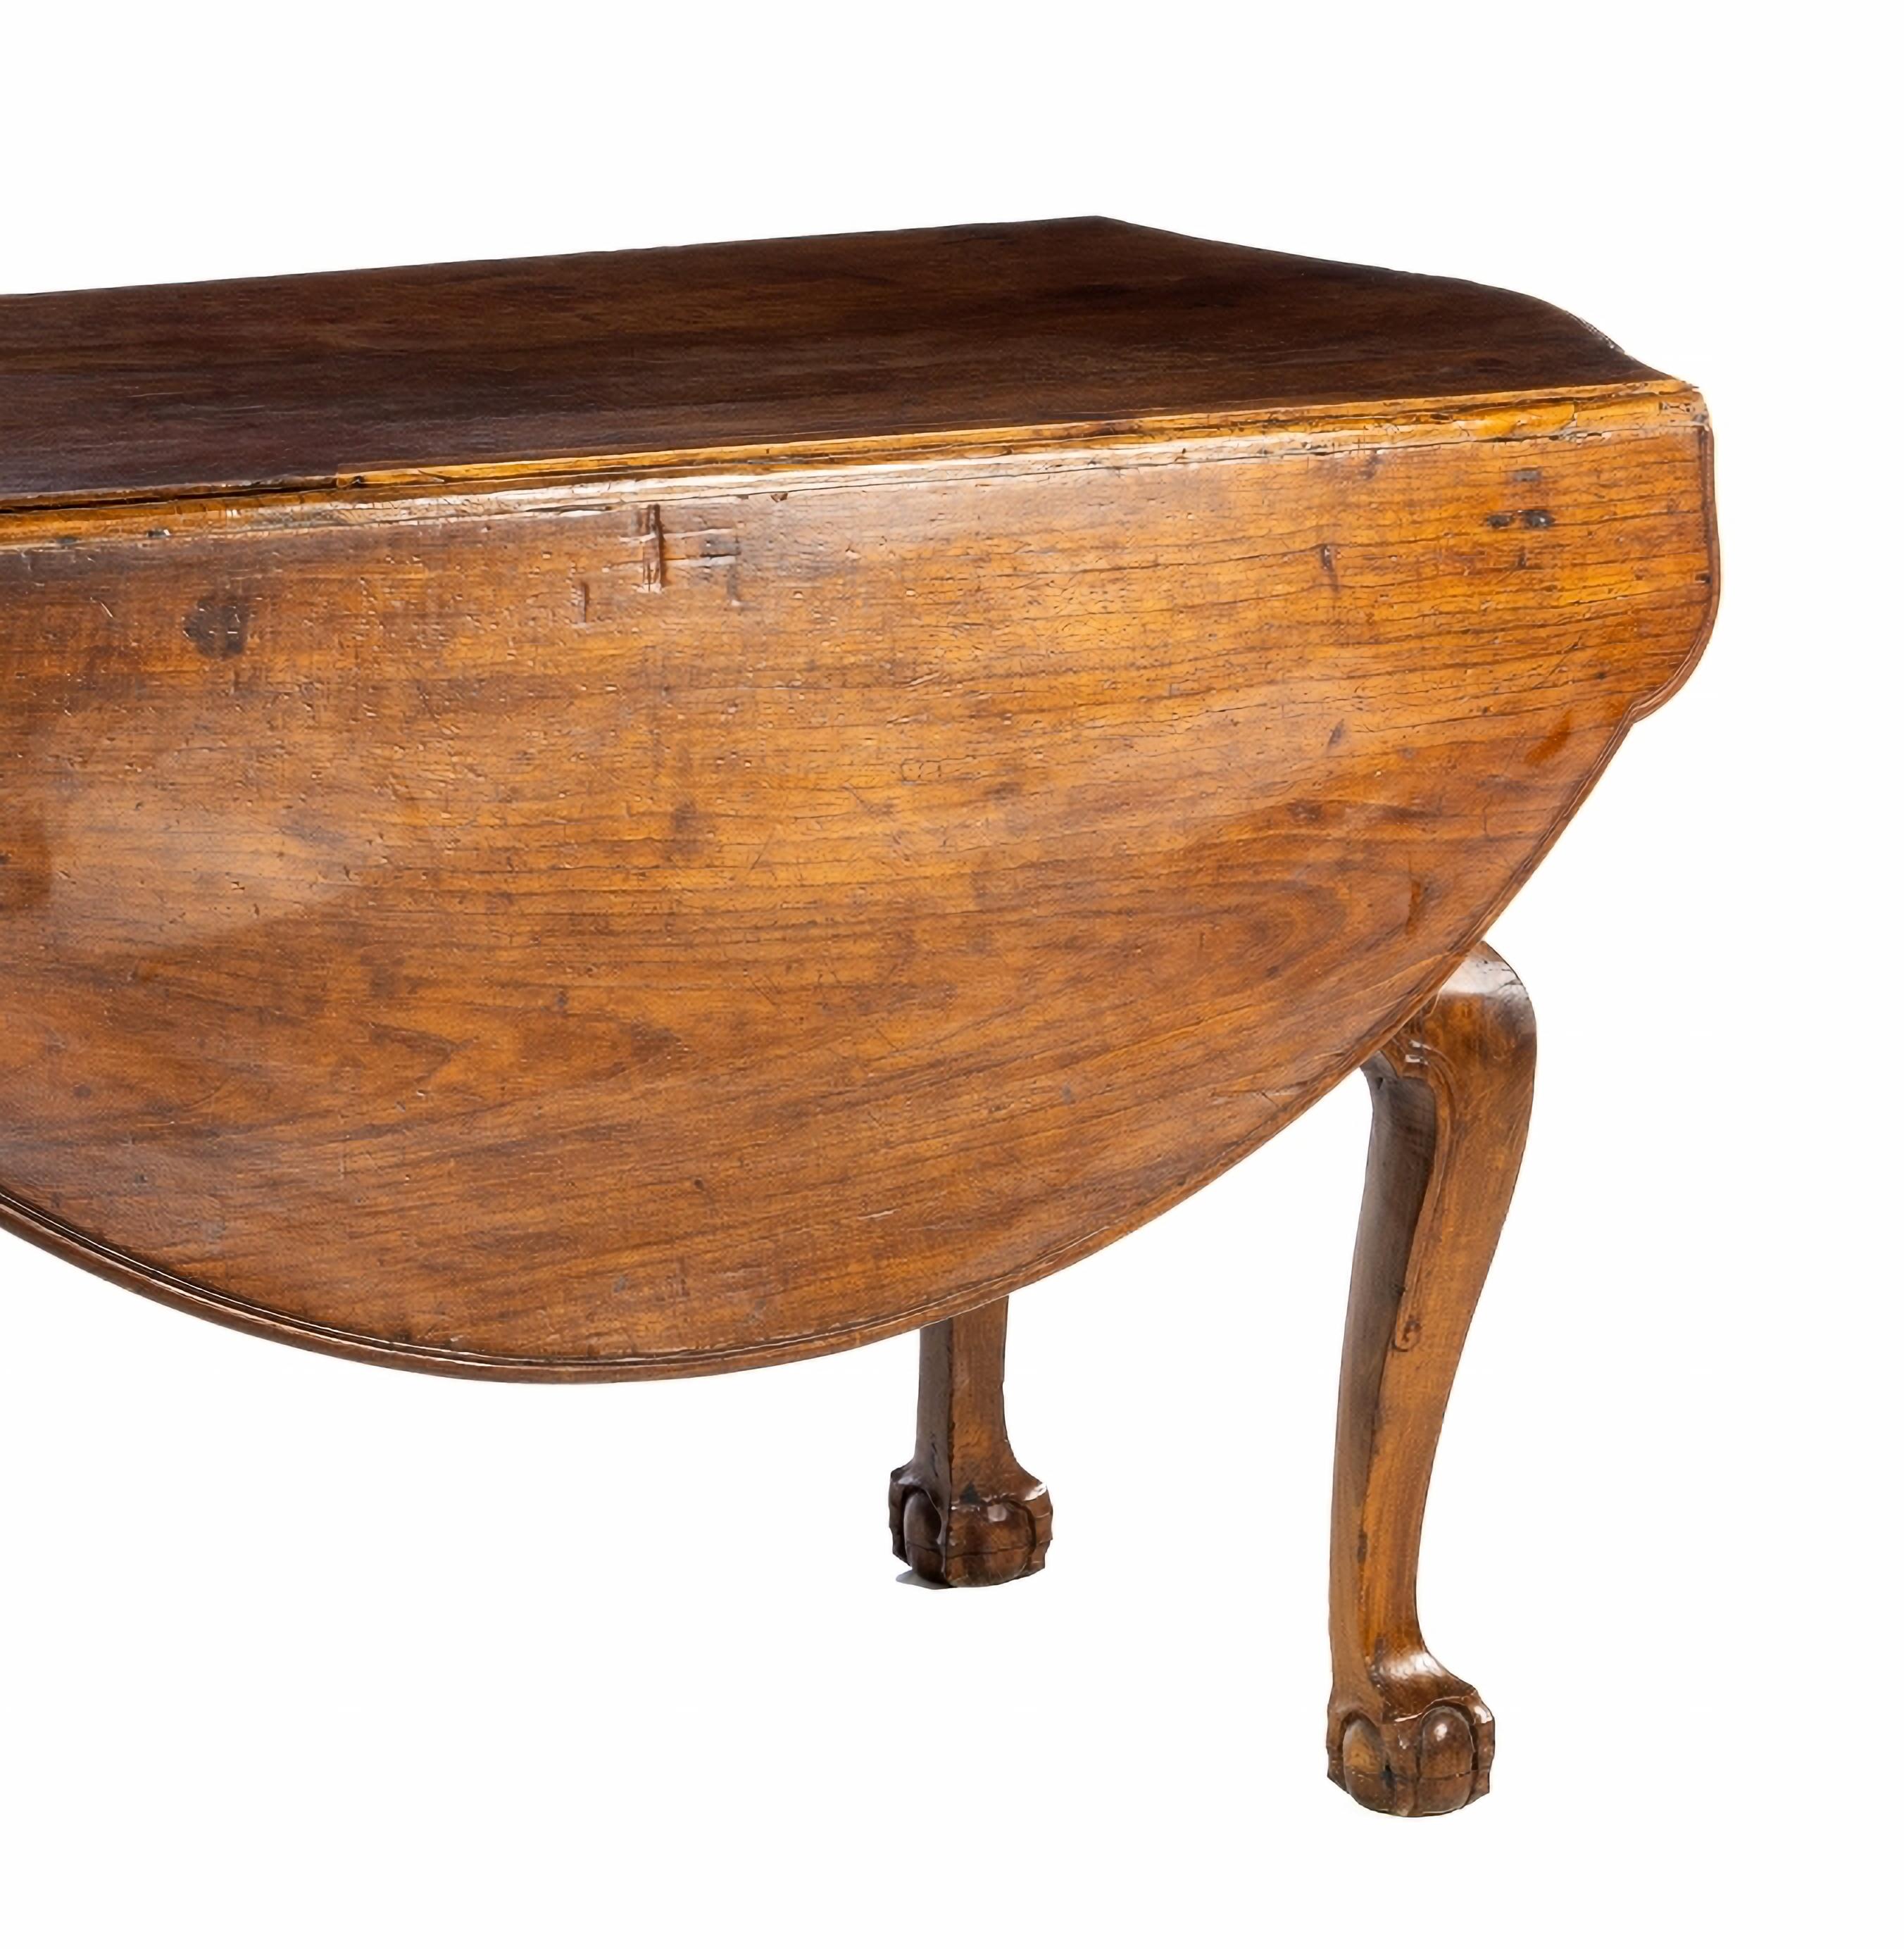 Amazing Portuguese  FLAPPED TABLE 17th Century

in chestnut wood with carvings, cut top, resting on four claw and ball feet.
 With two drawers. 
Metal hardware. 
Dim.: (open) 83 x 150 x 146 cm; (closed) 83 147 x 64 cm
very good condition